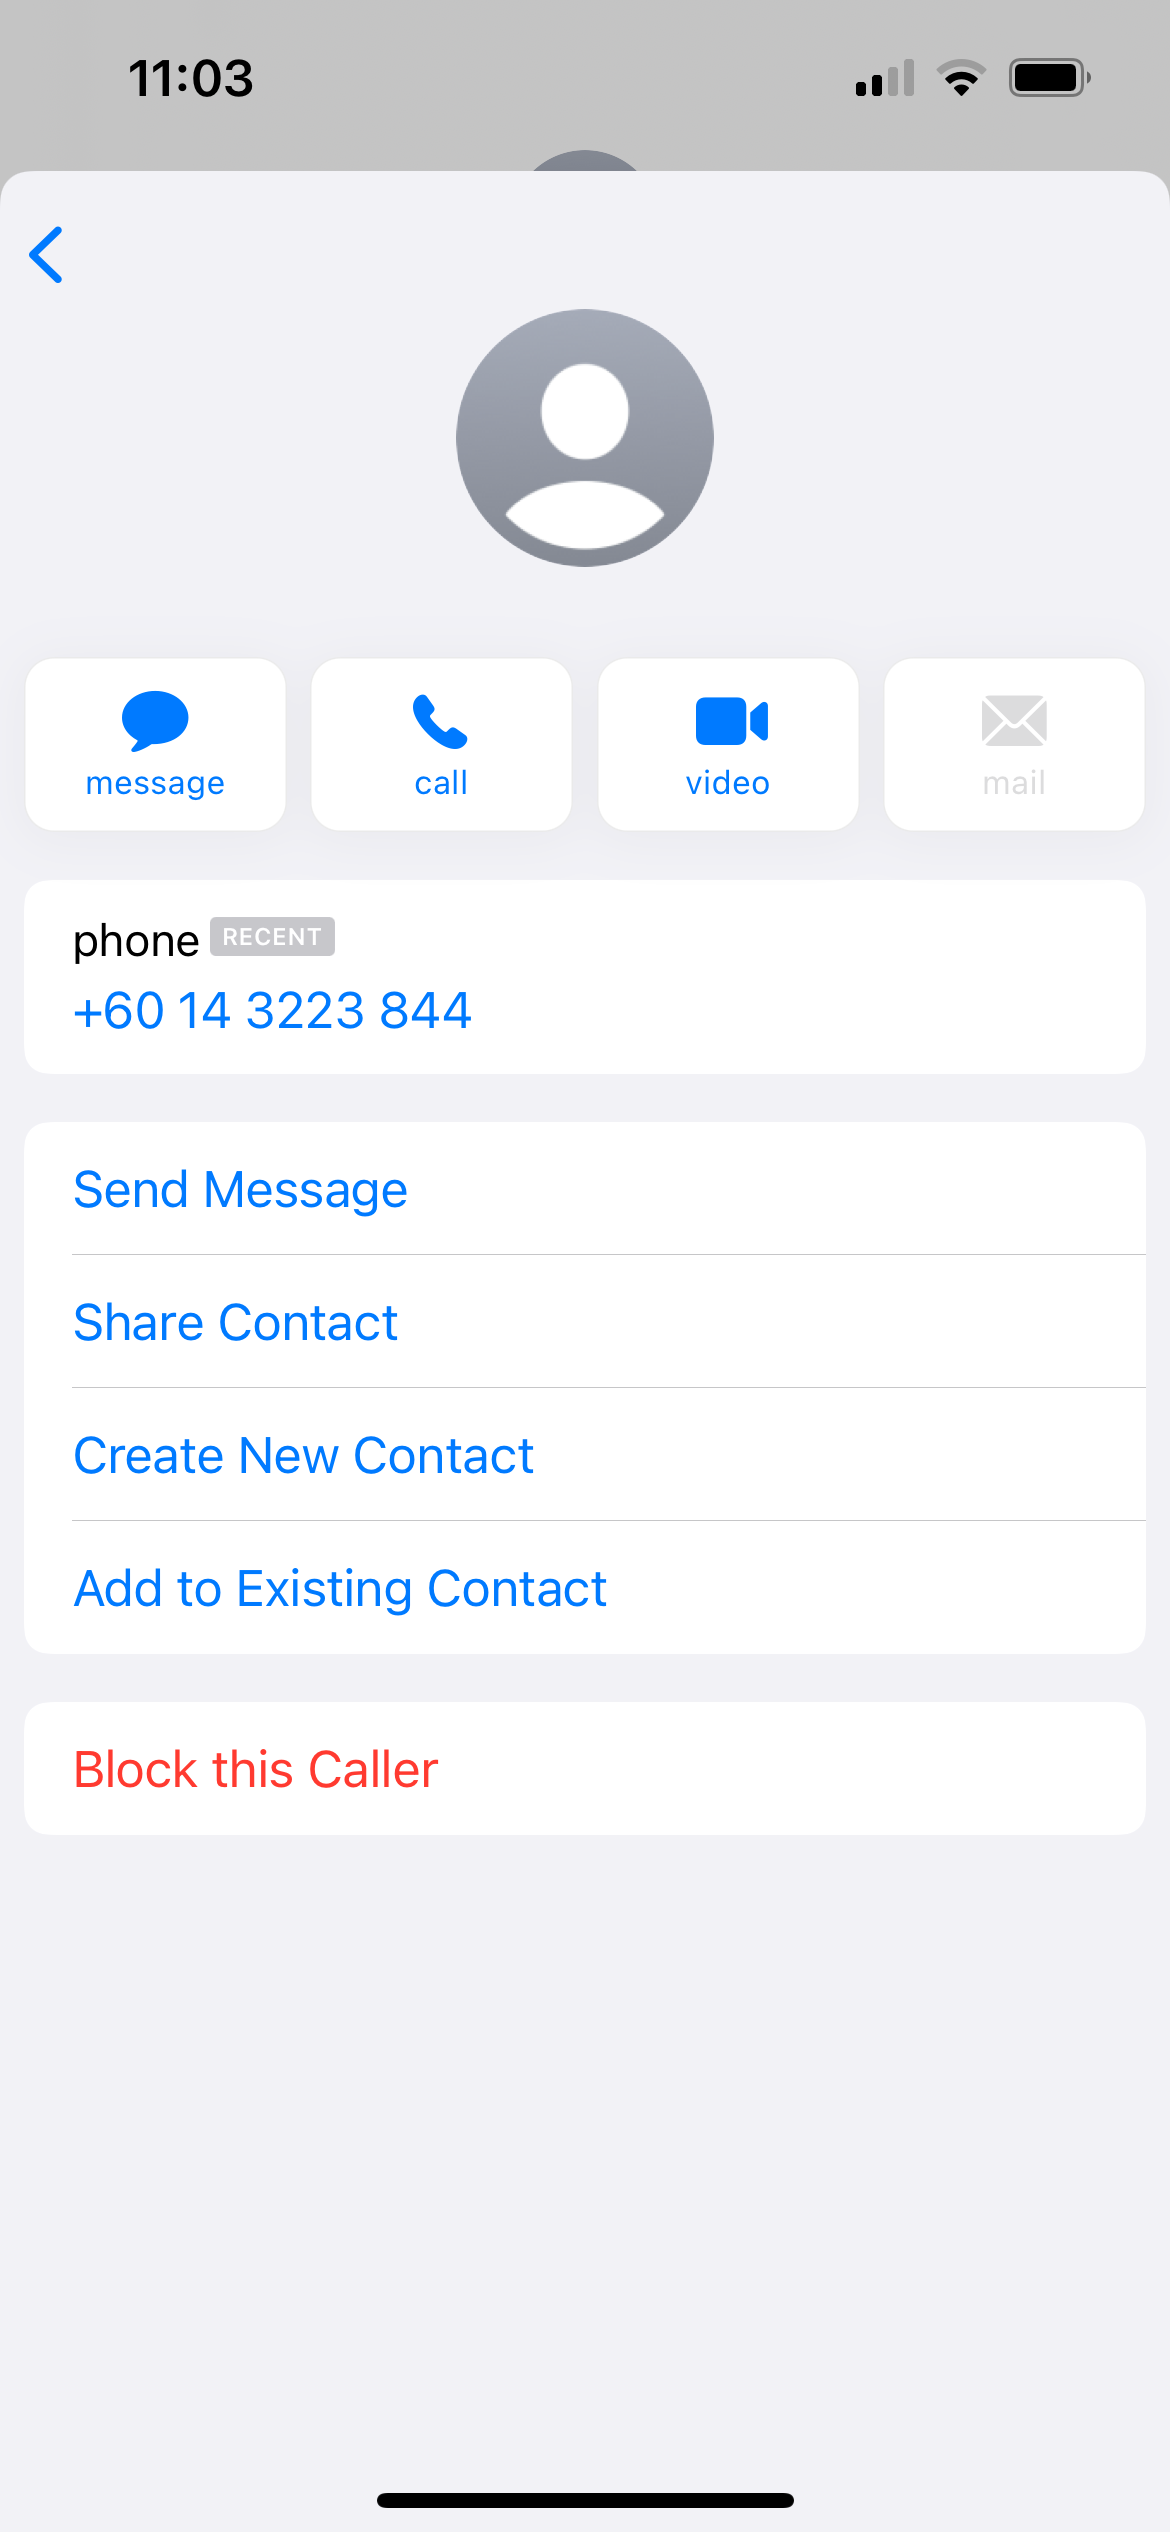 spam phone number info on iphone messages